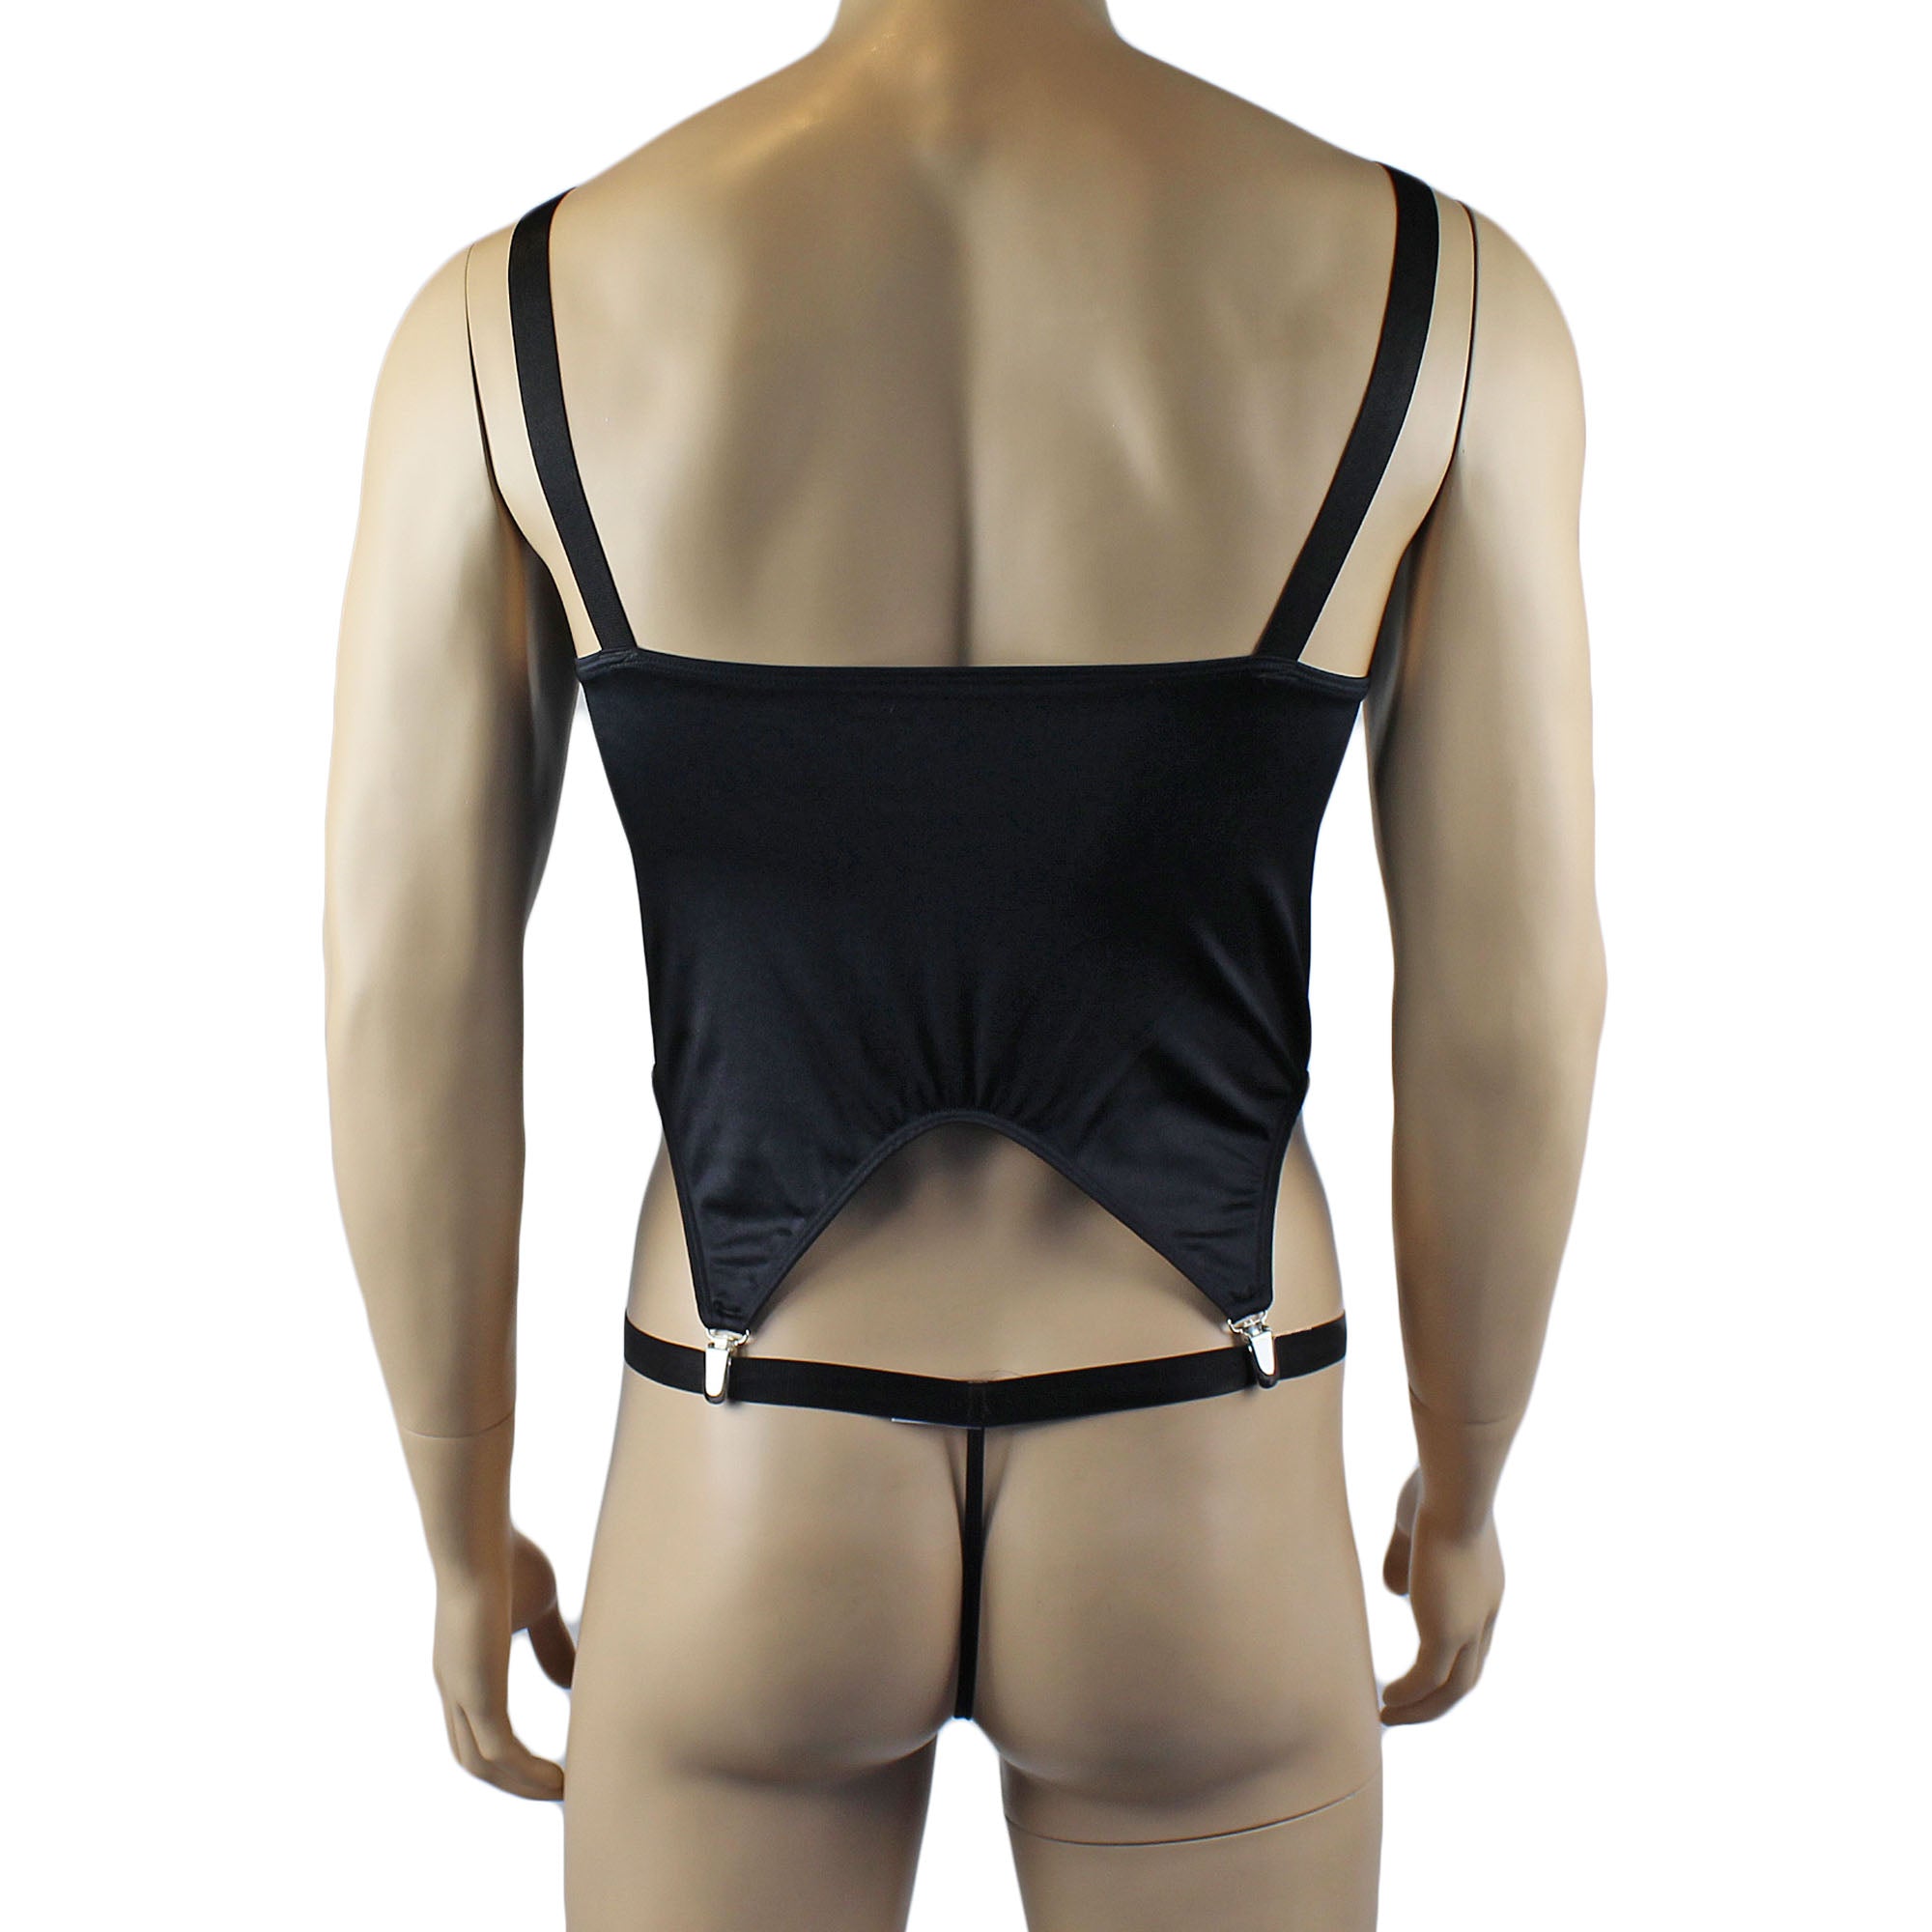 Mens Janice Corset Top and Thong with Metal Clips - Sizes up to 3XL